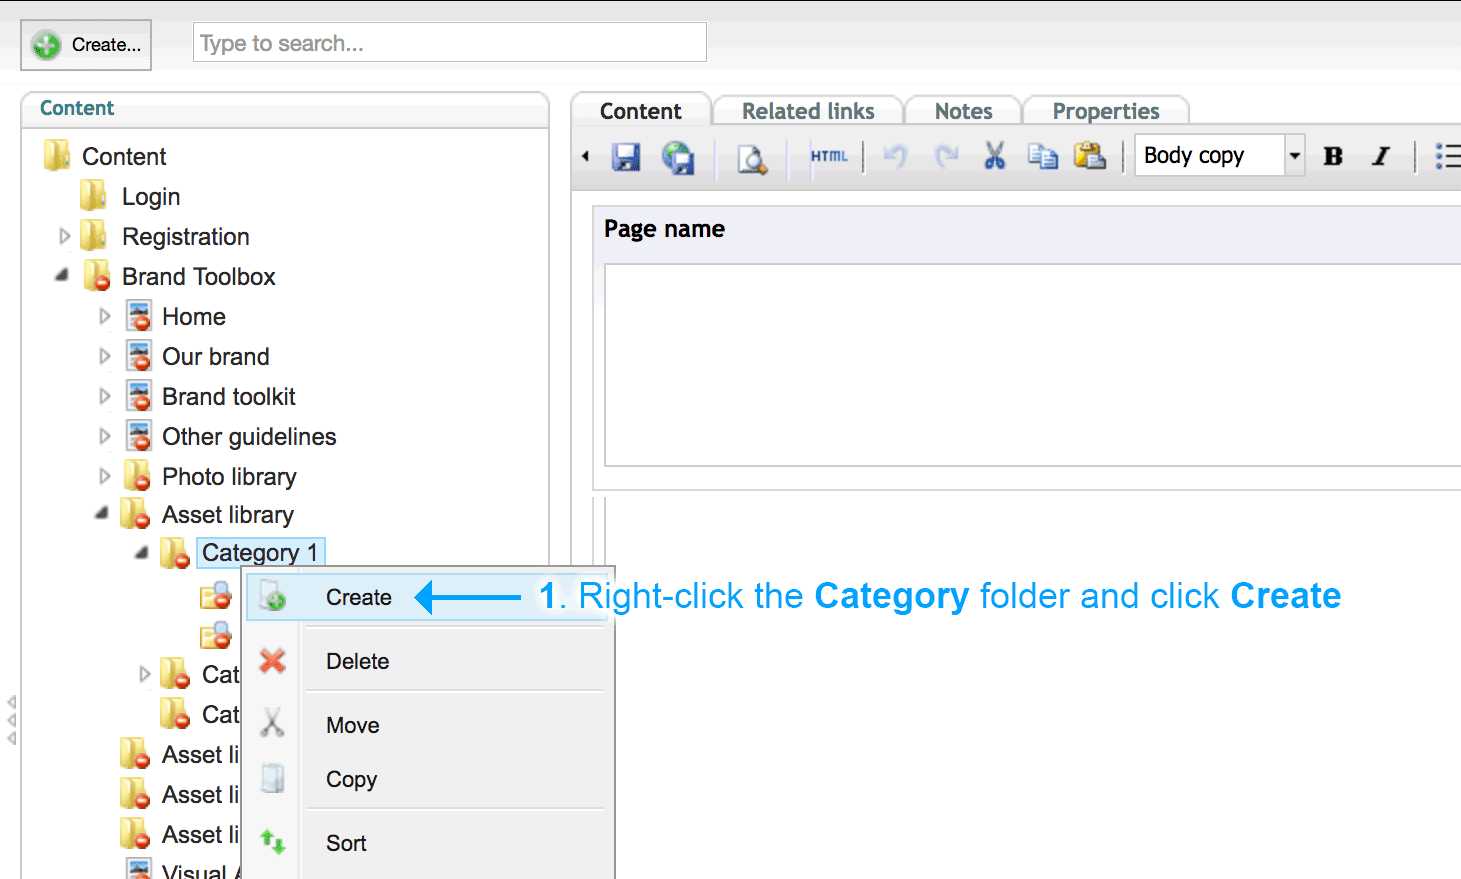 Step 1 – Click Create from the actions/context menu